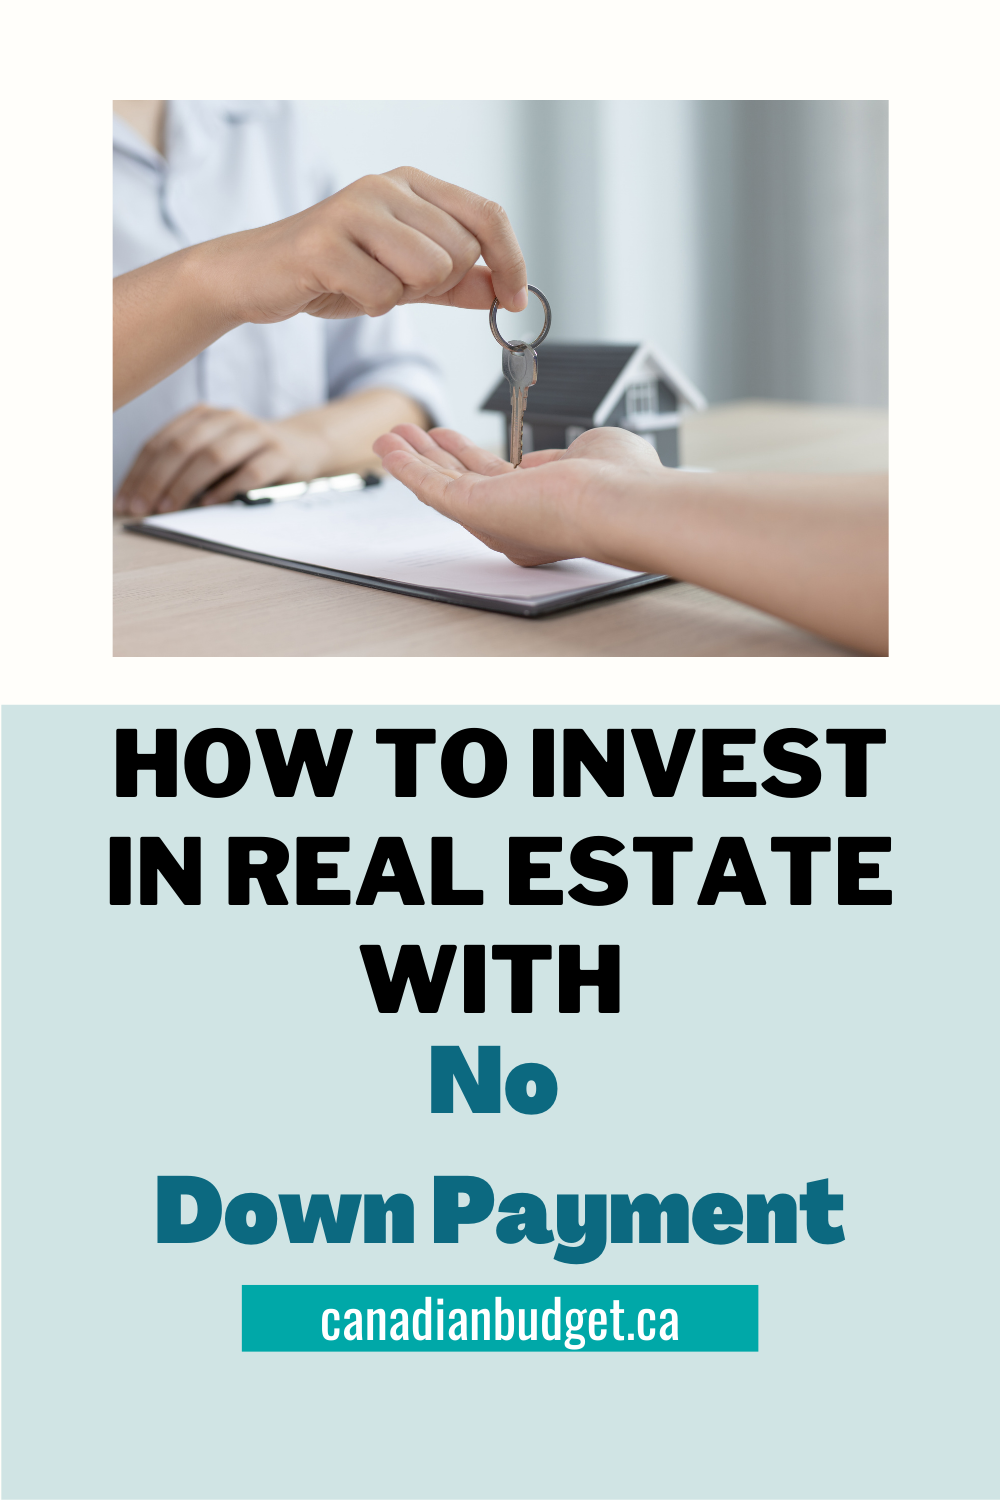 Real Estate Investing | Real estate investment | REITs | Invest With No downpayment